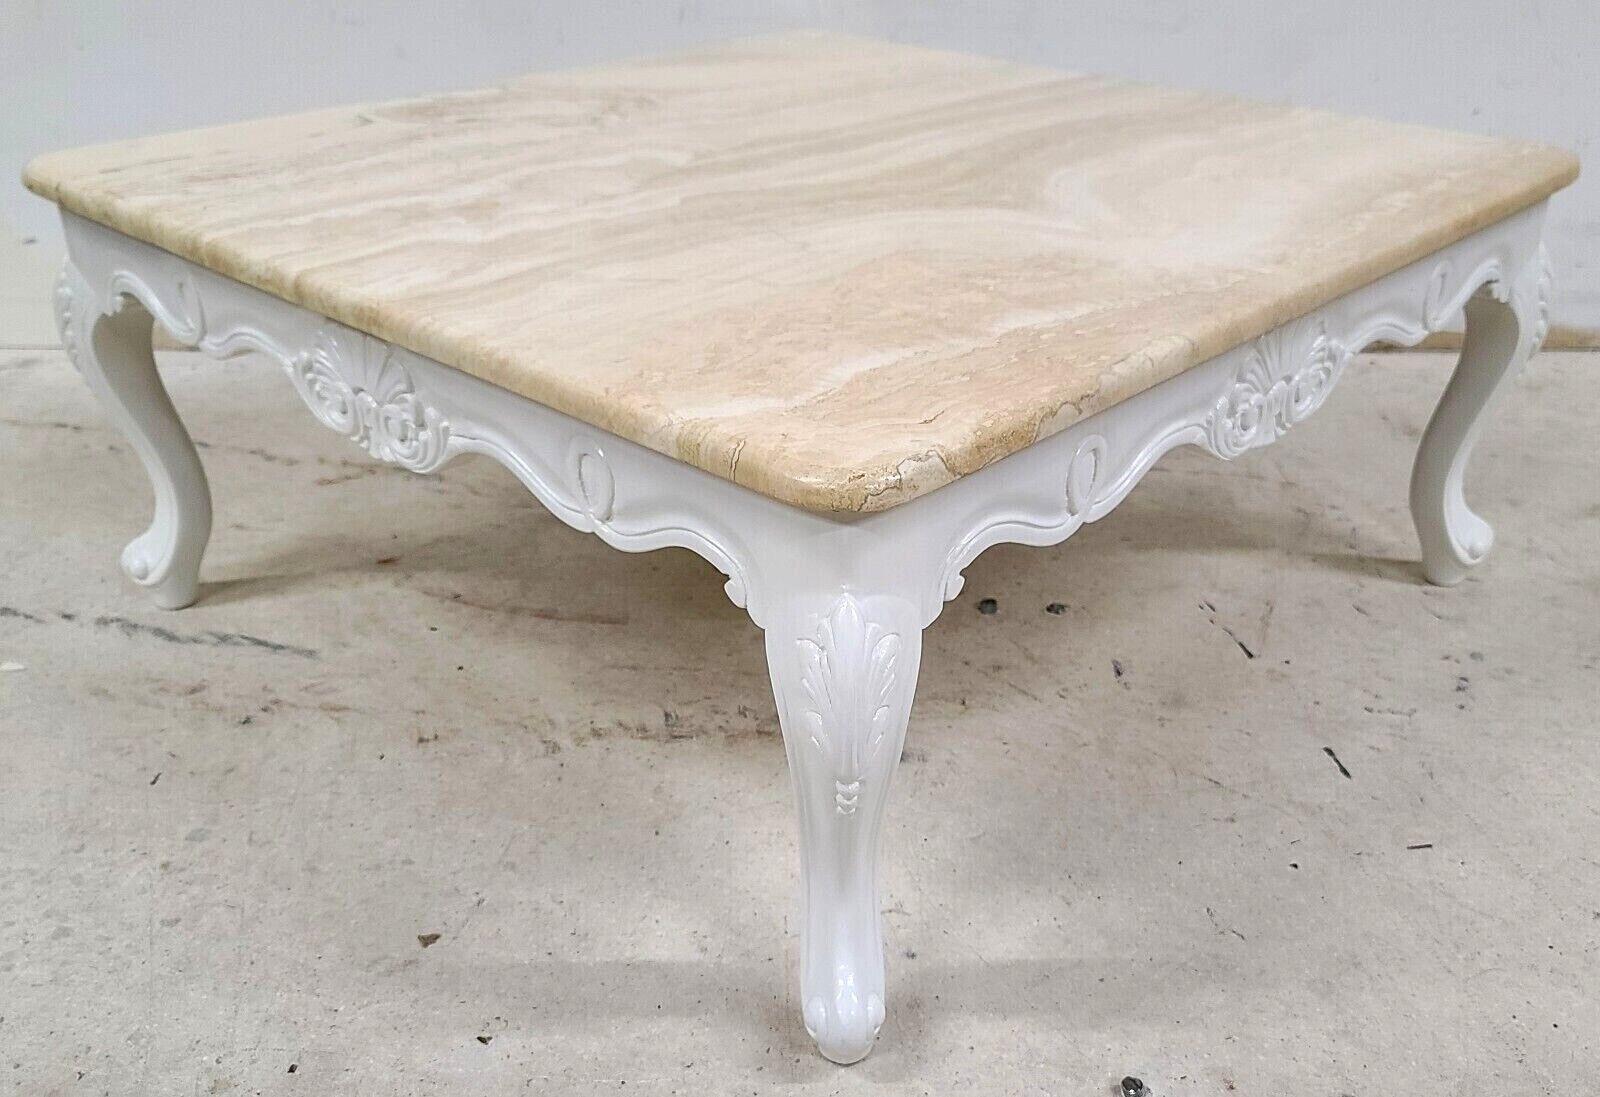 French Provincial Travertine Marble & Wood Cocktail Coffee Table In Good Condition For Sale In Lake Worth, FL